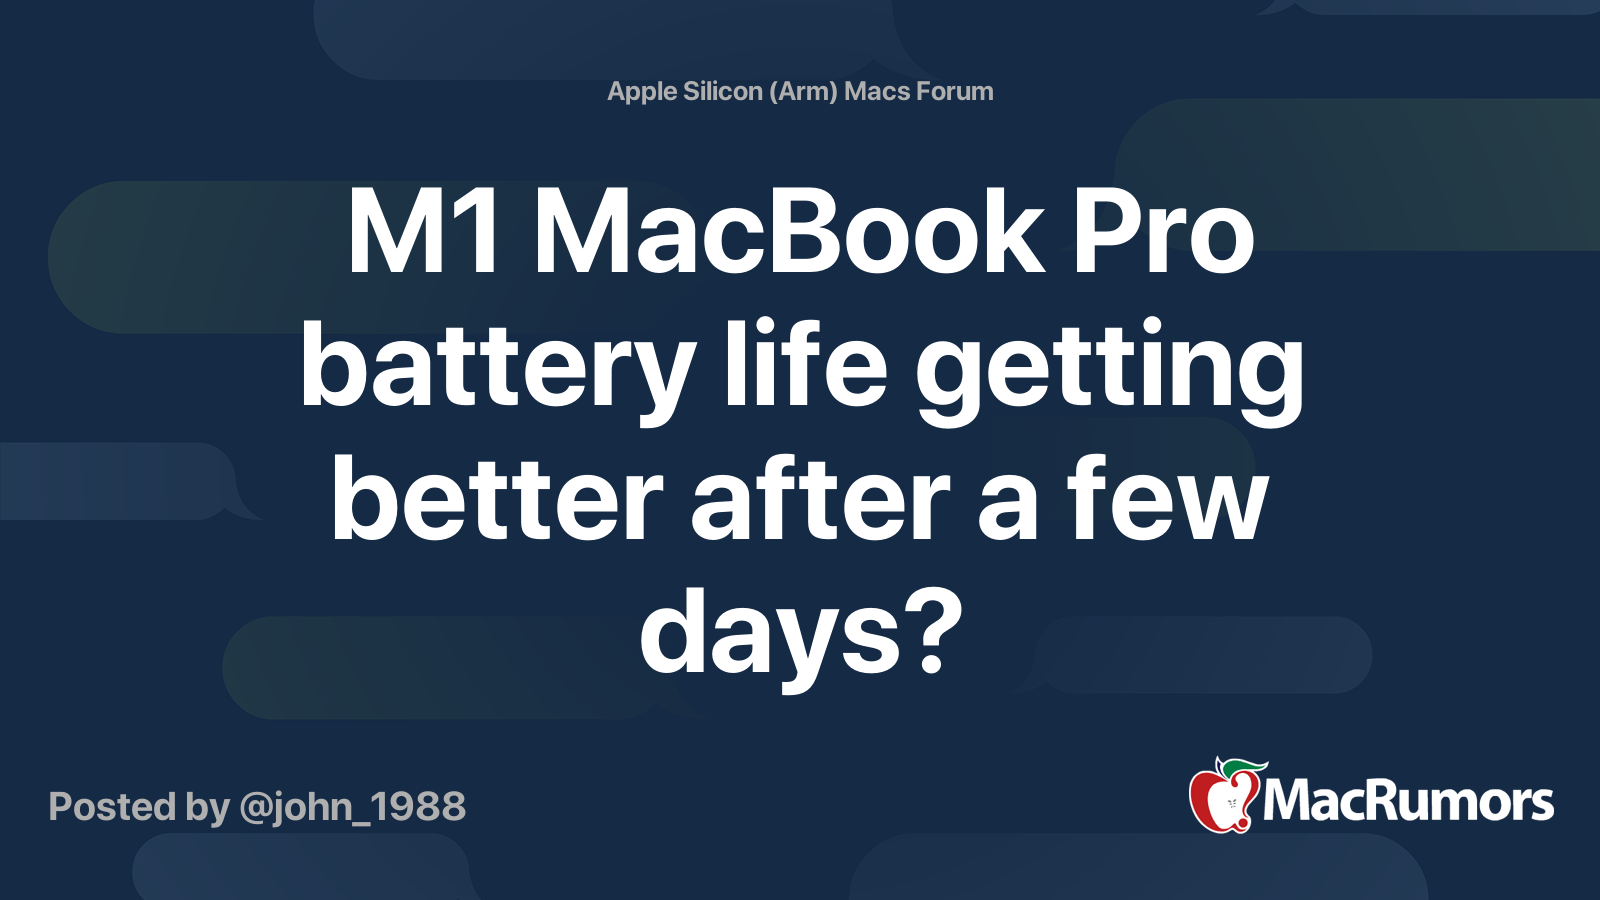 M1 MacBook Pro battery life getting better after a few days